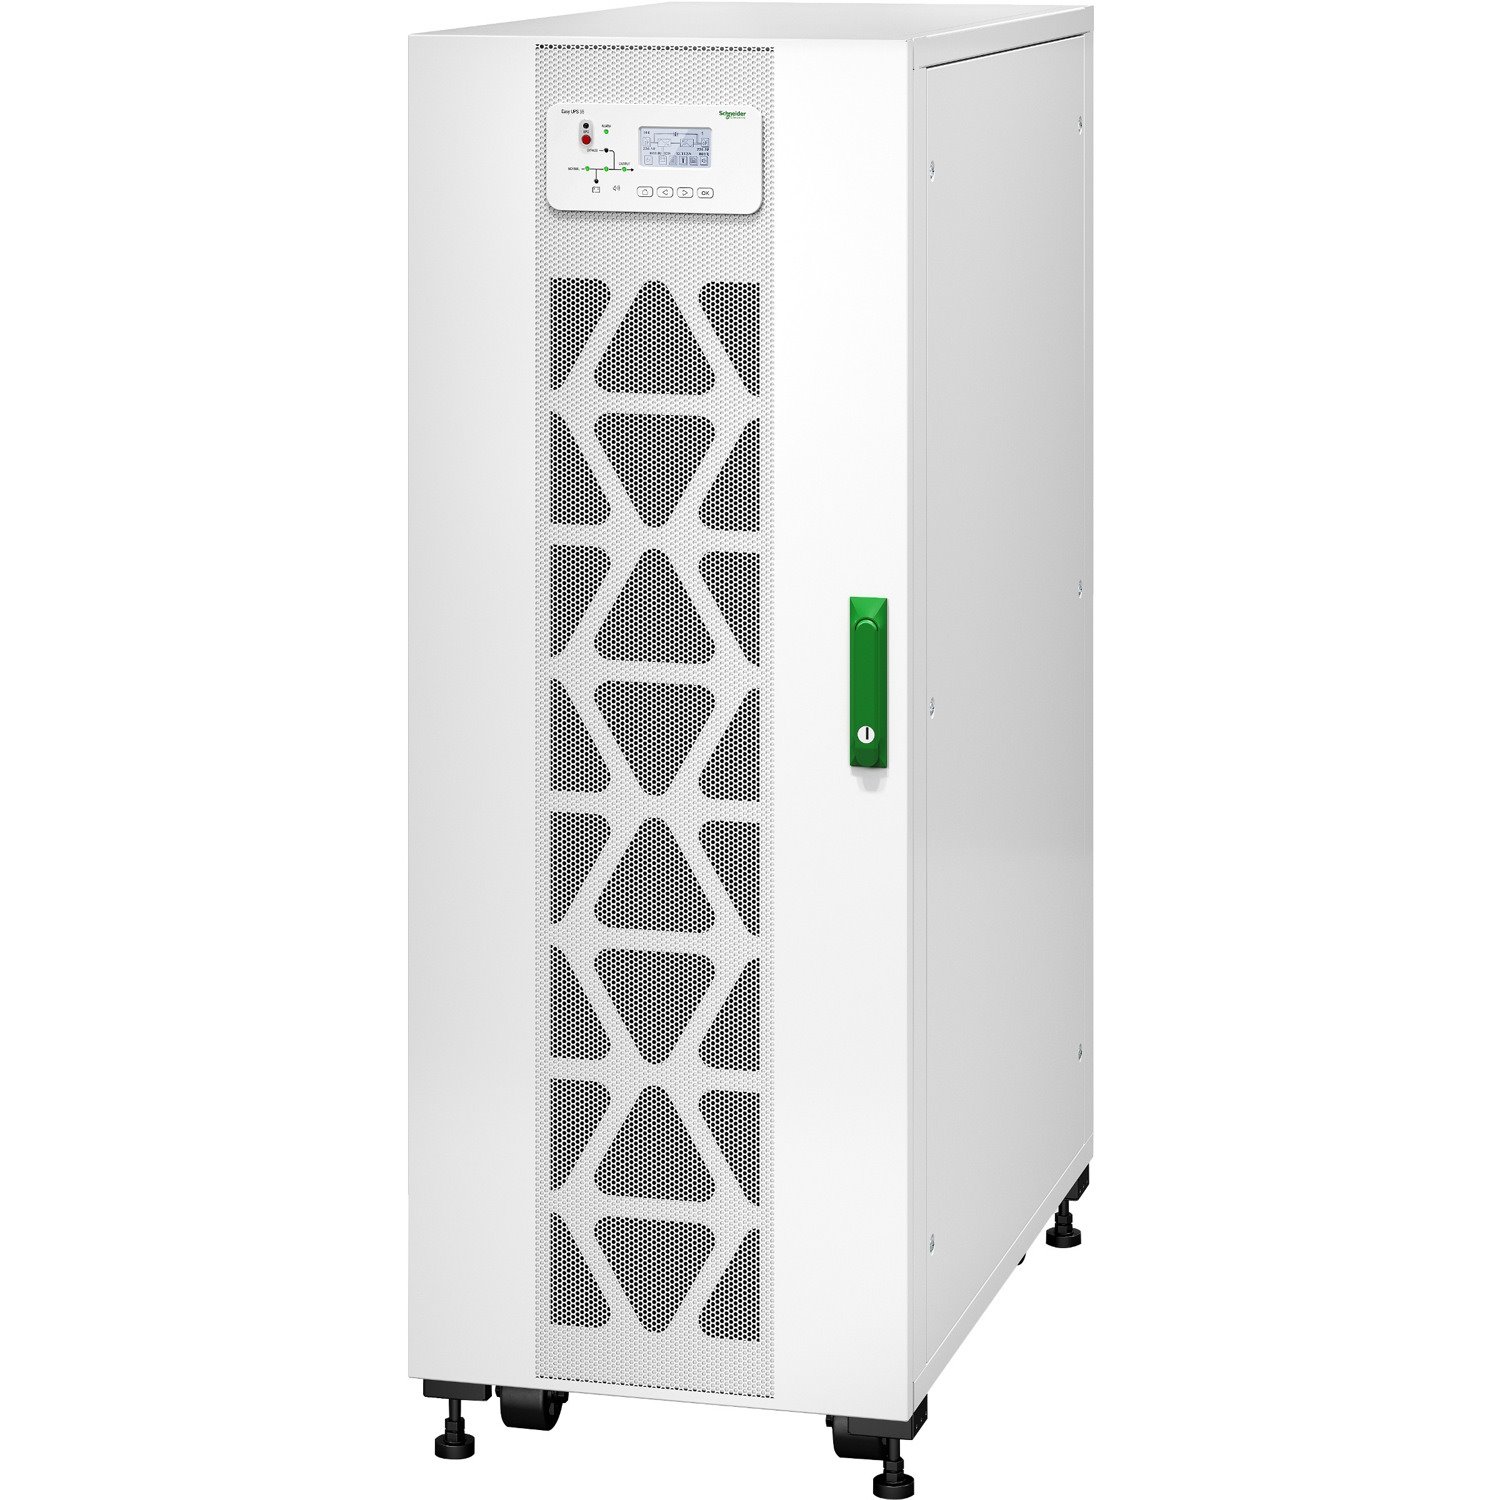 APC by Schneider Electric Easy UPS 3S Dual Conversion Online UPS - 30 kVA - Three Phase